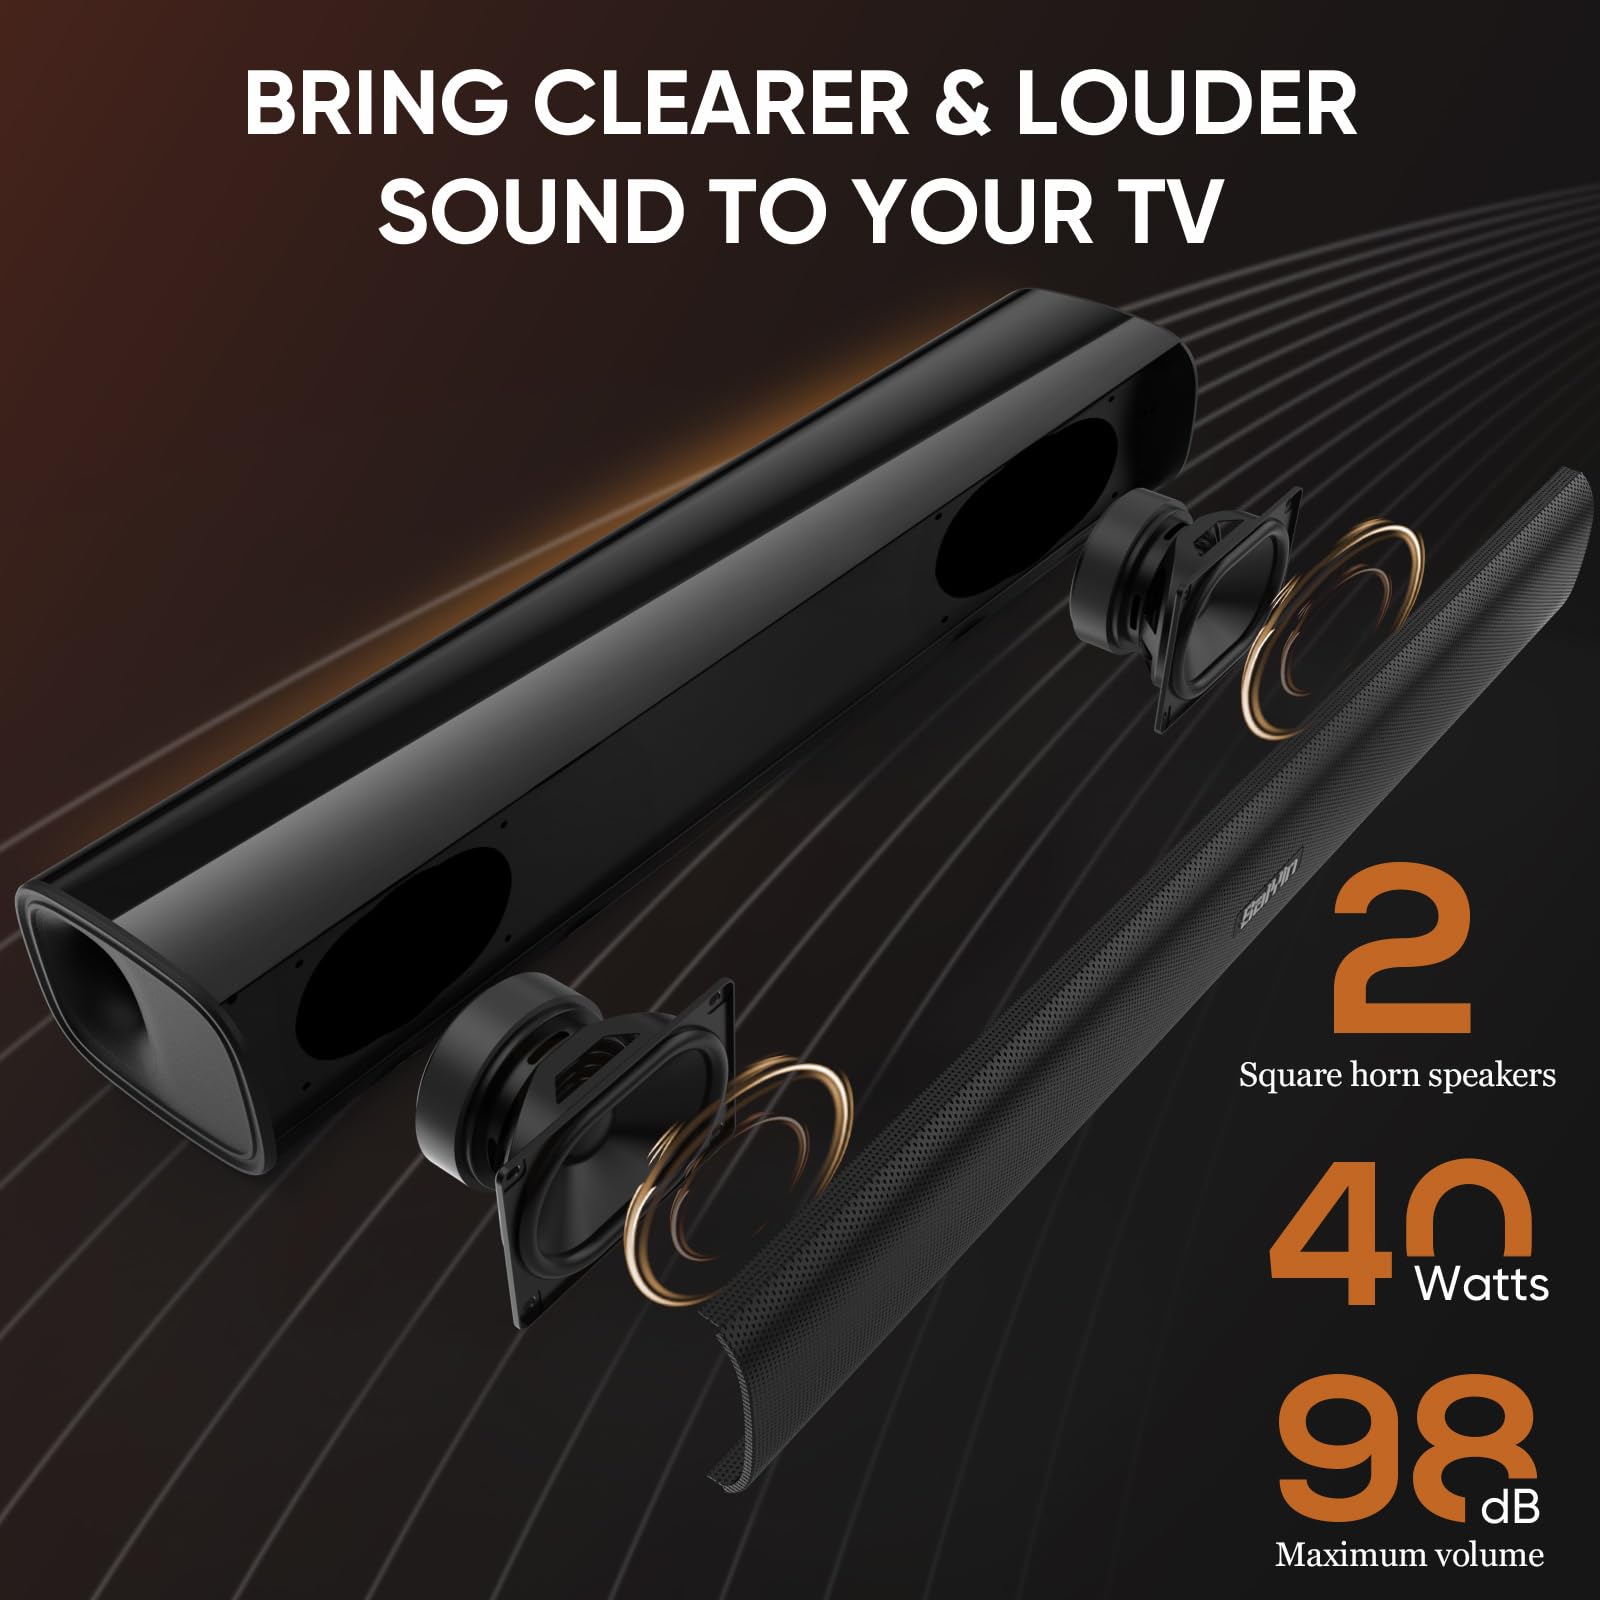 Saiyin Sound Bars for TV, 40 Watts Small Soundbar for TV,Surround Sound System TV Sound Bar Speakers with Bluetooth/Optical/AUX Connection for PC/Gaming/Projectors,17inch